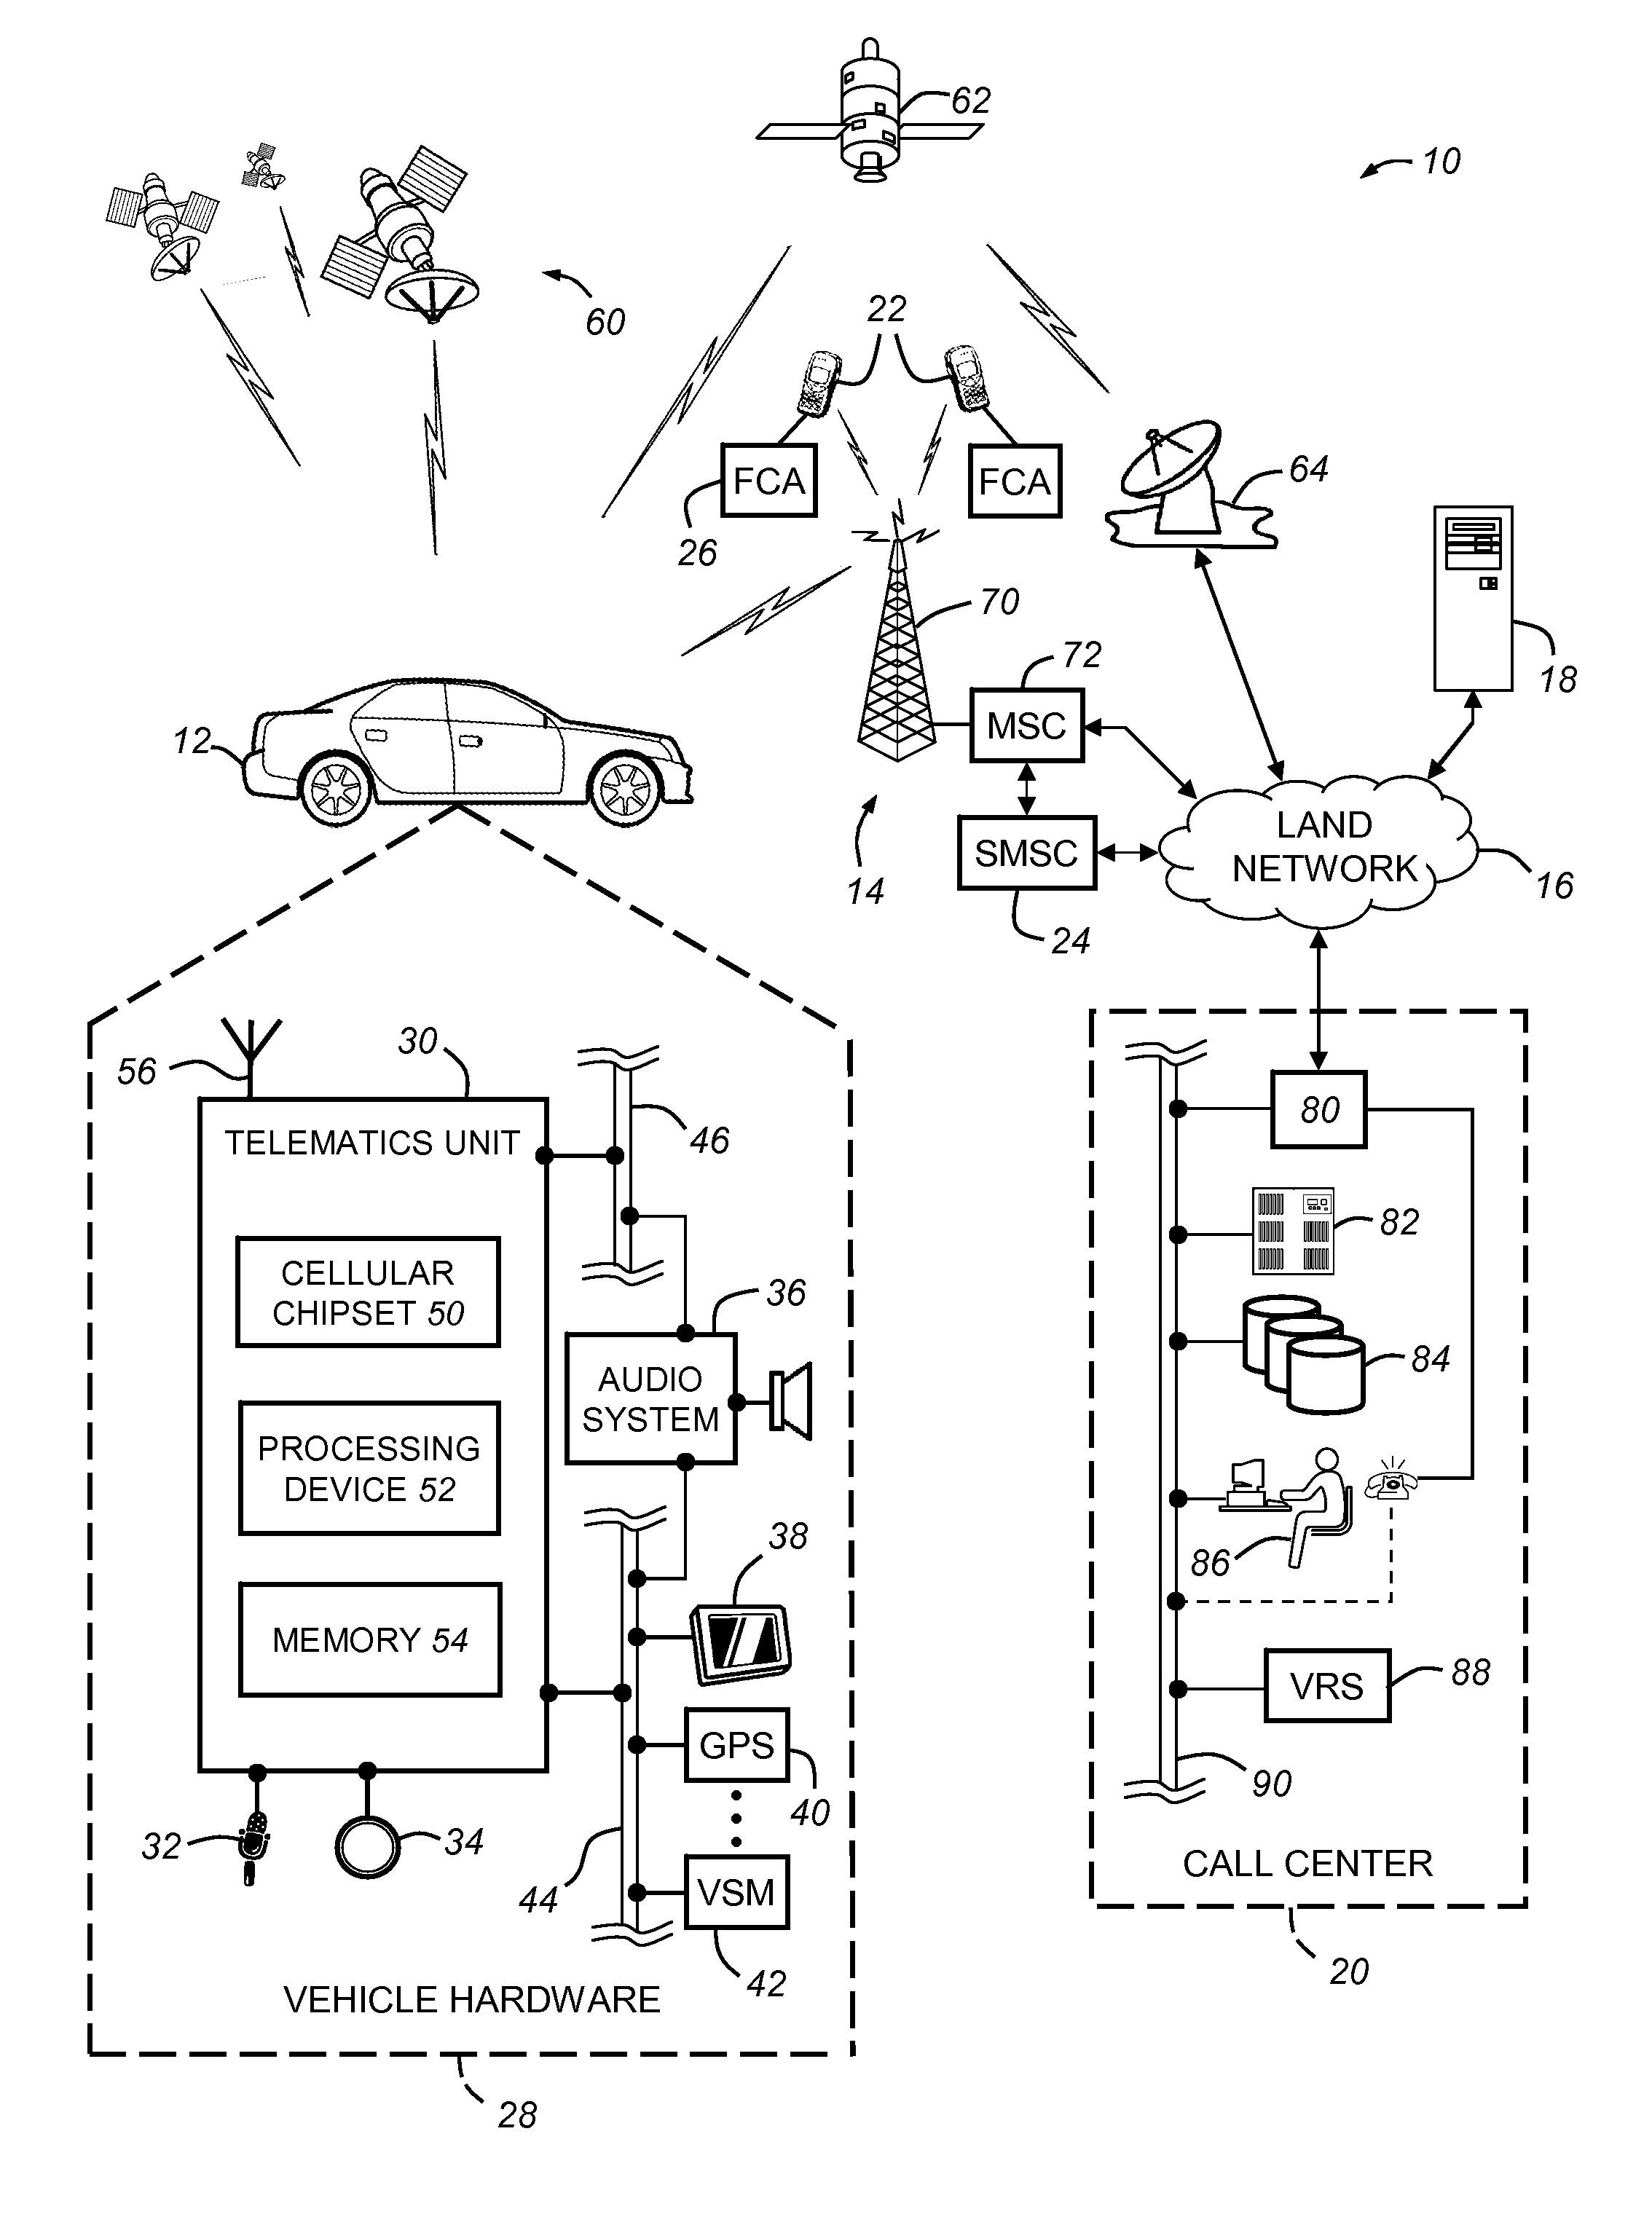 Method for remotely controlling vehicle features